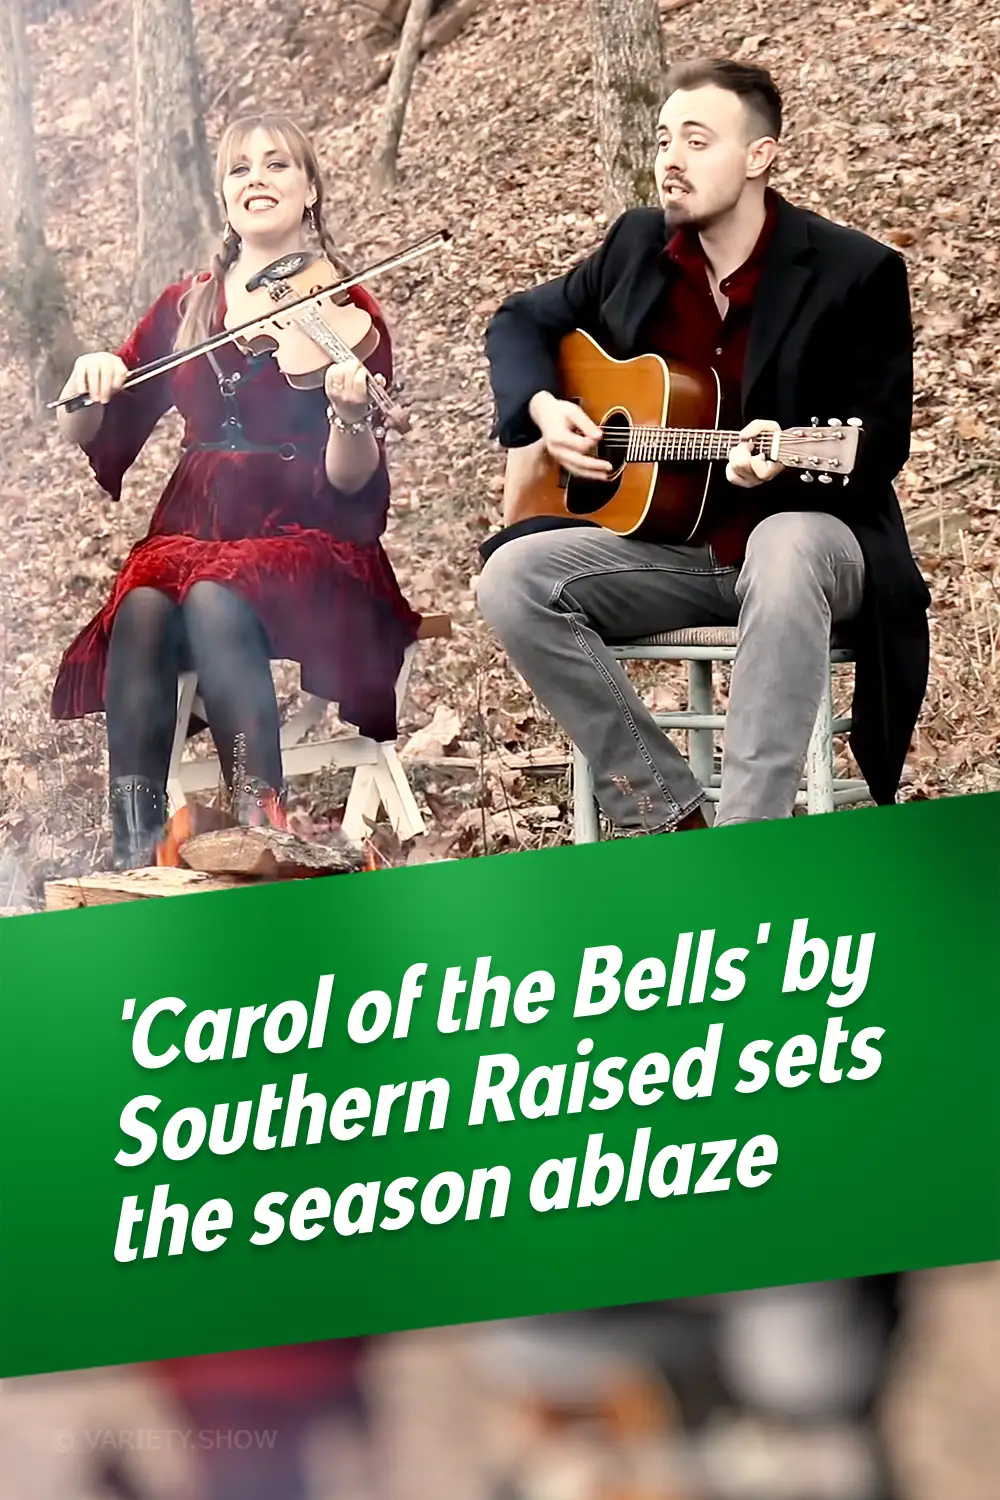 \'Carol of the Bells\' by Southern Raised sets the season ablaze